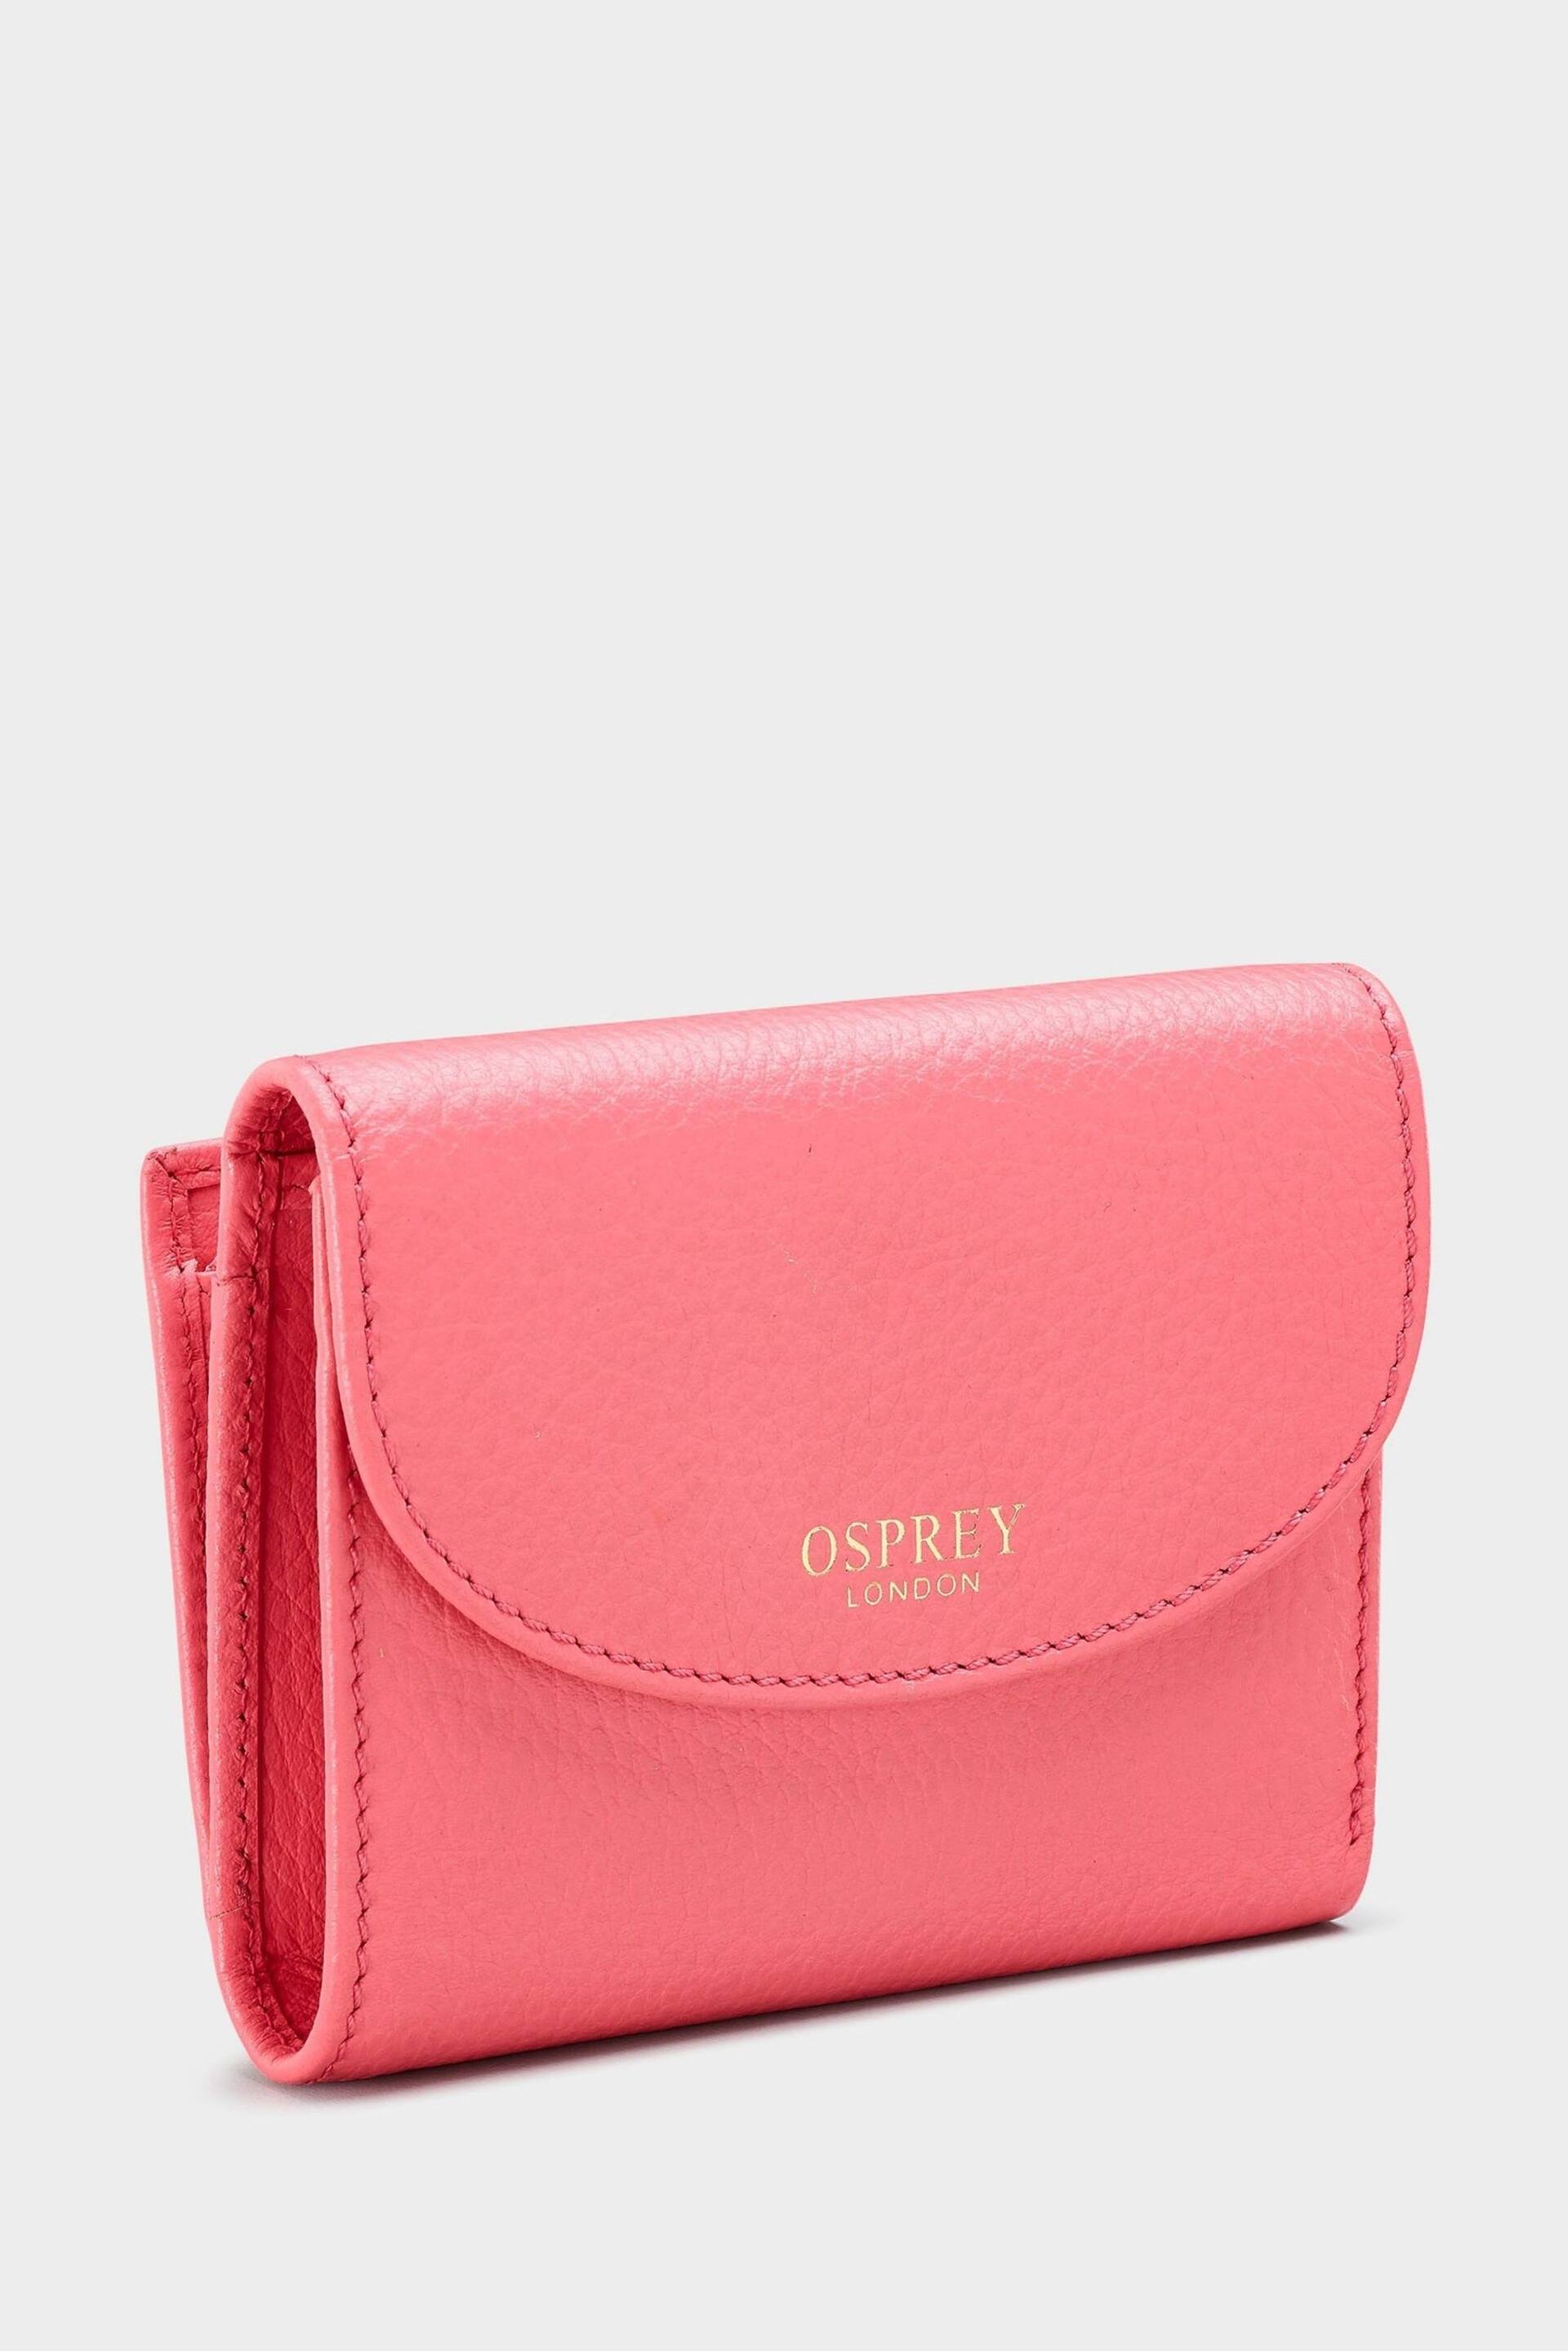 OSPREY LONDON The Tilly Leather Purse Gift Set - Image 9 of 9